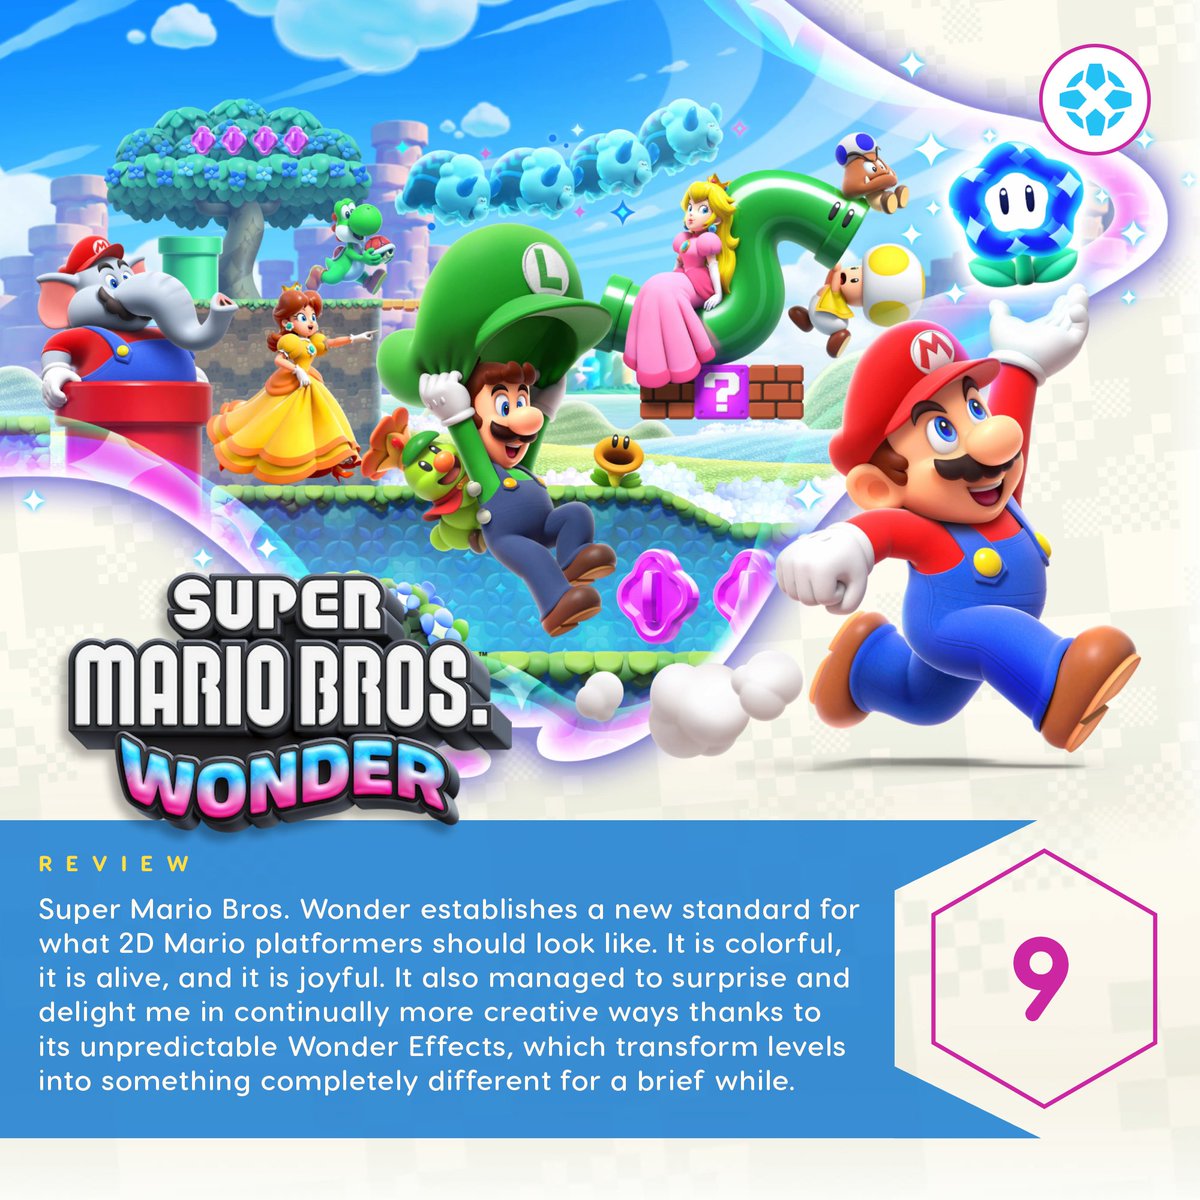 Super Mario Bros. Wonder feels like a 21st-century successor to Super Mario World, and I’m not sure I can give it a higher compliment than that. bit.ly/3Q4ksPp